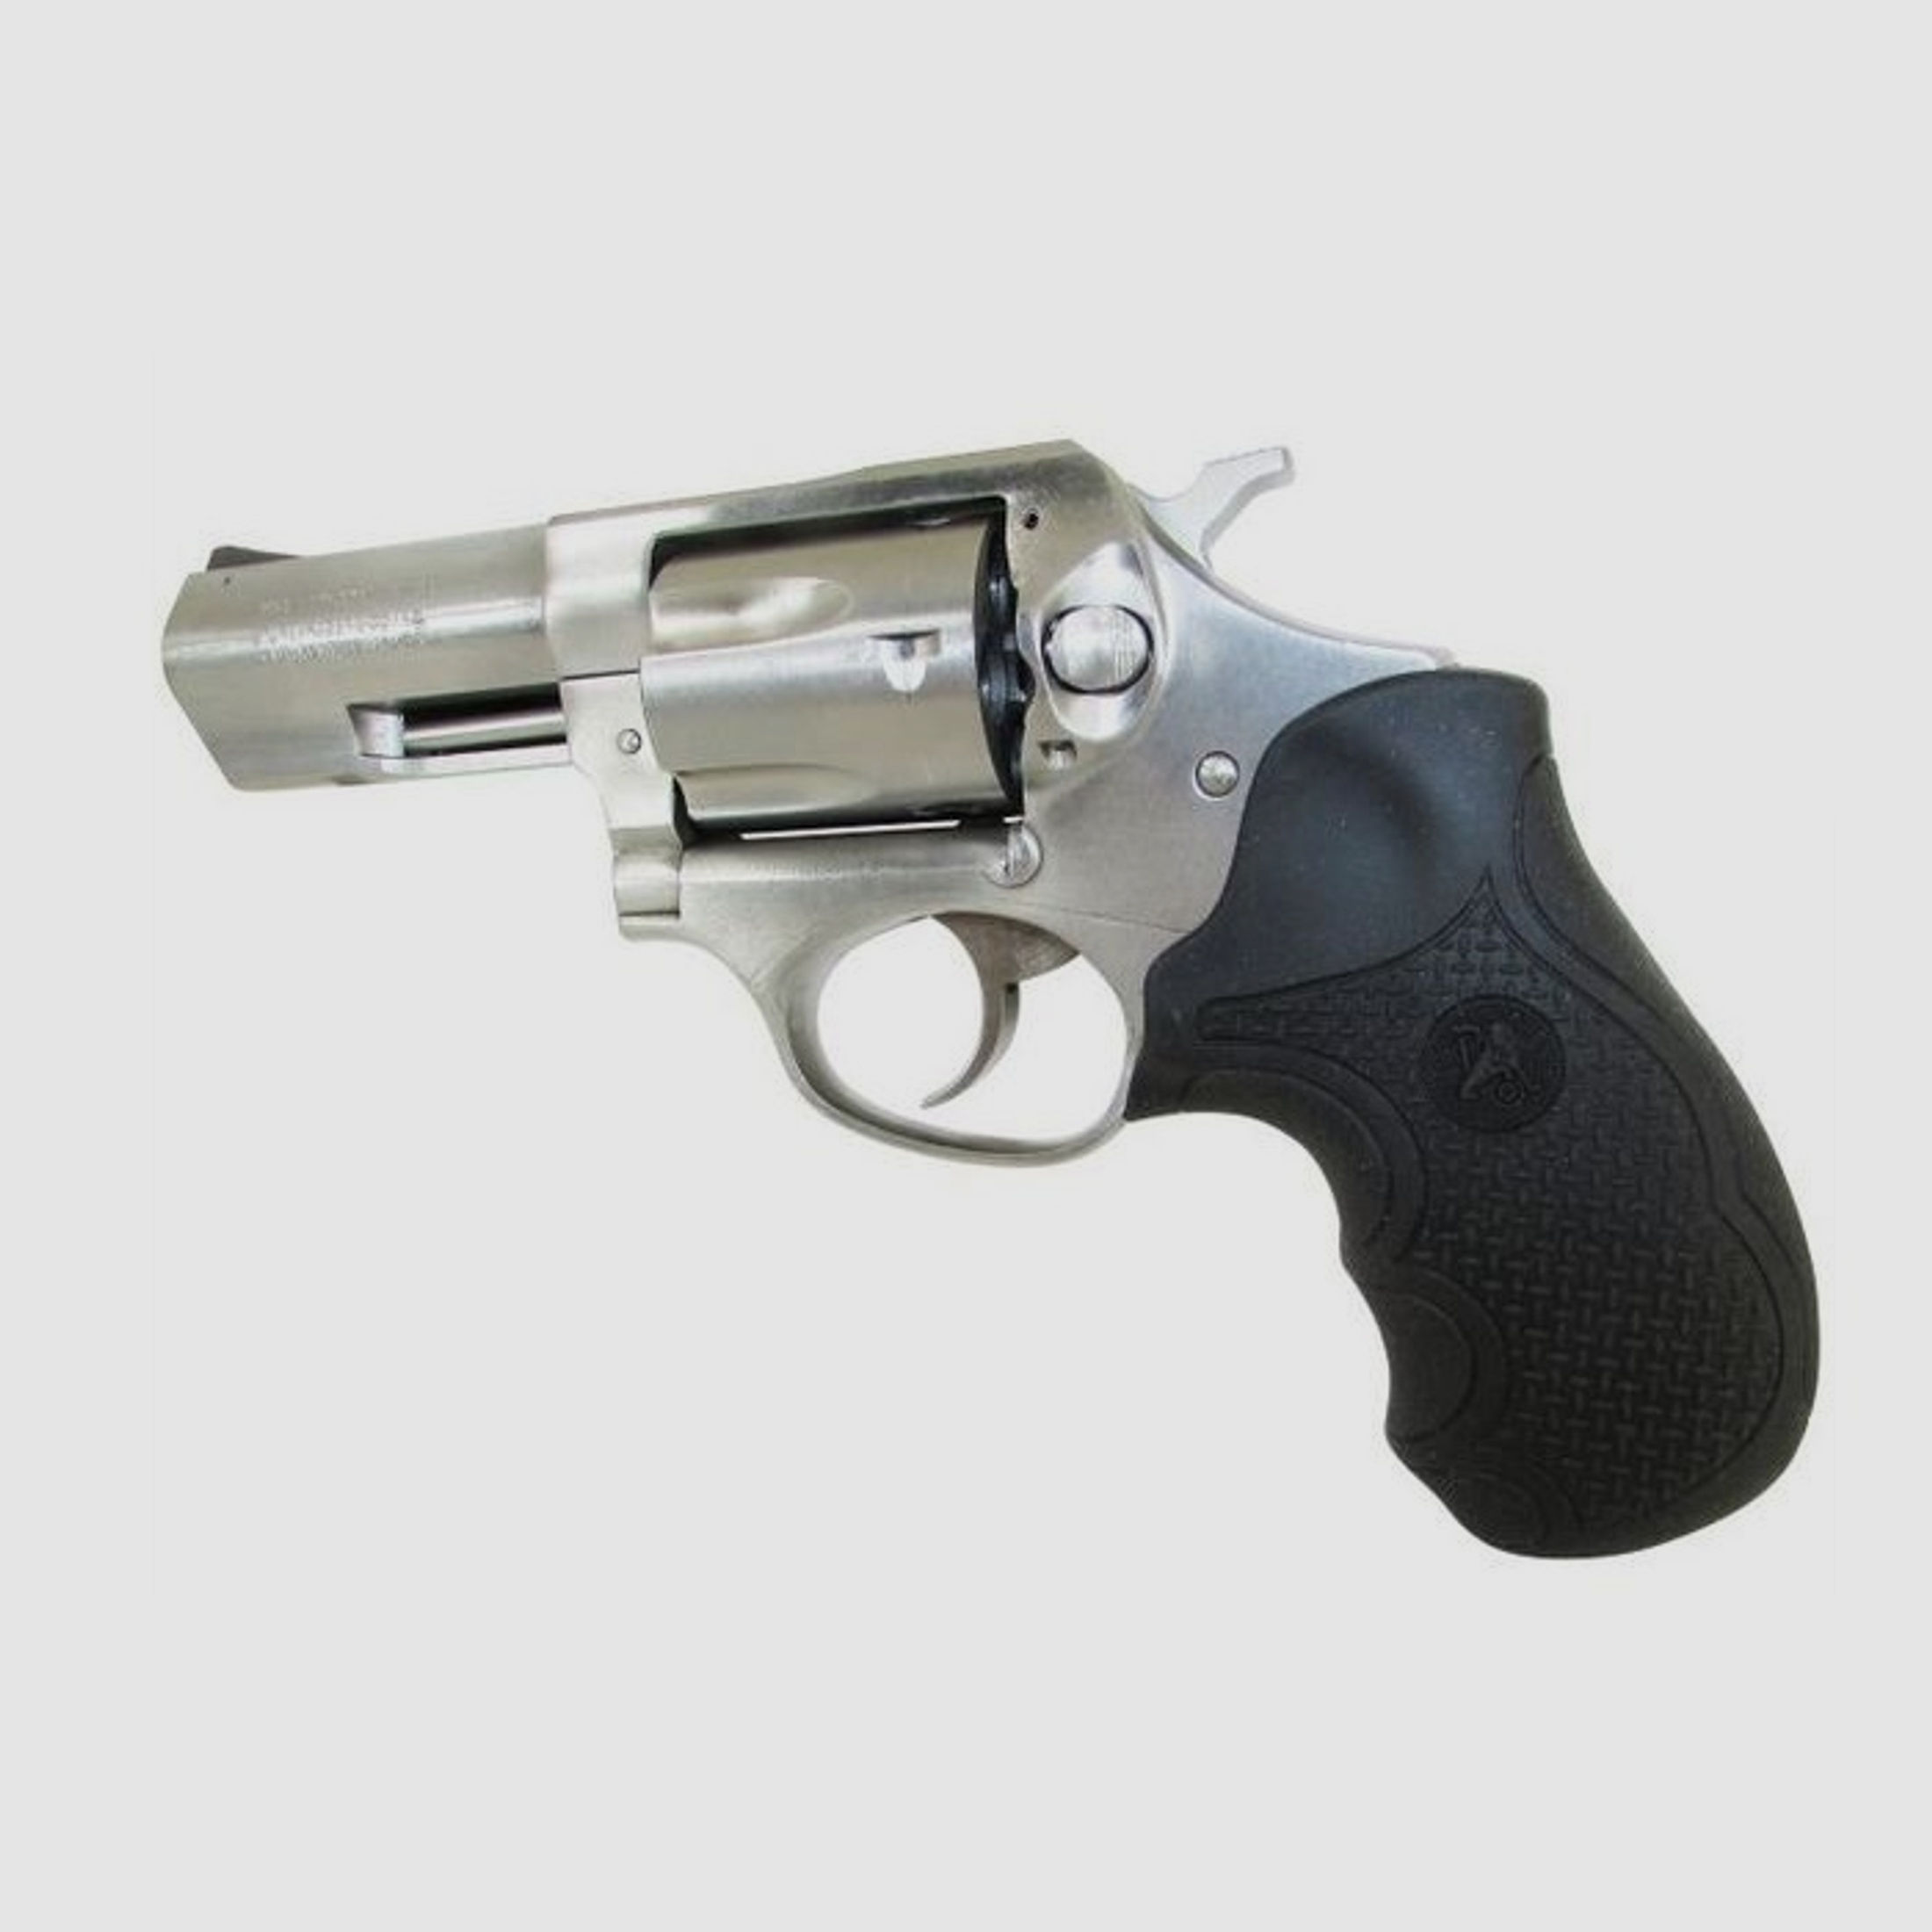 Pachmayr Griff Diamond Pro Ruger SP101